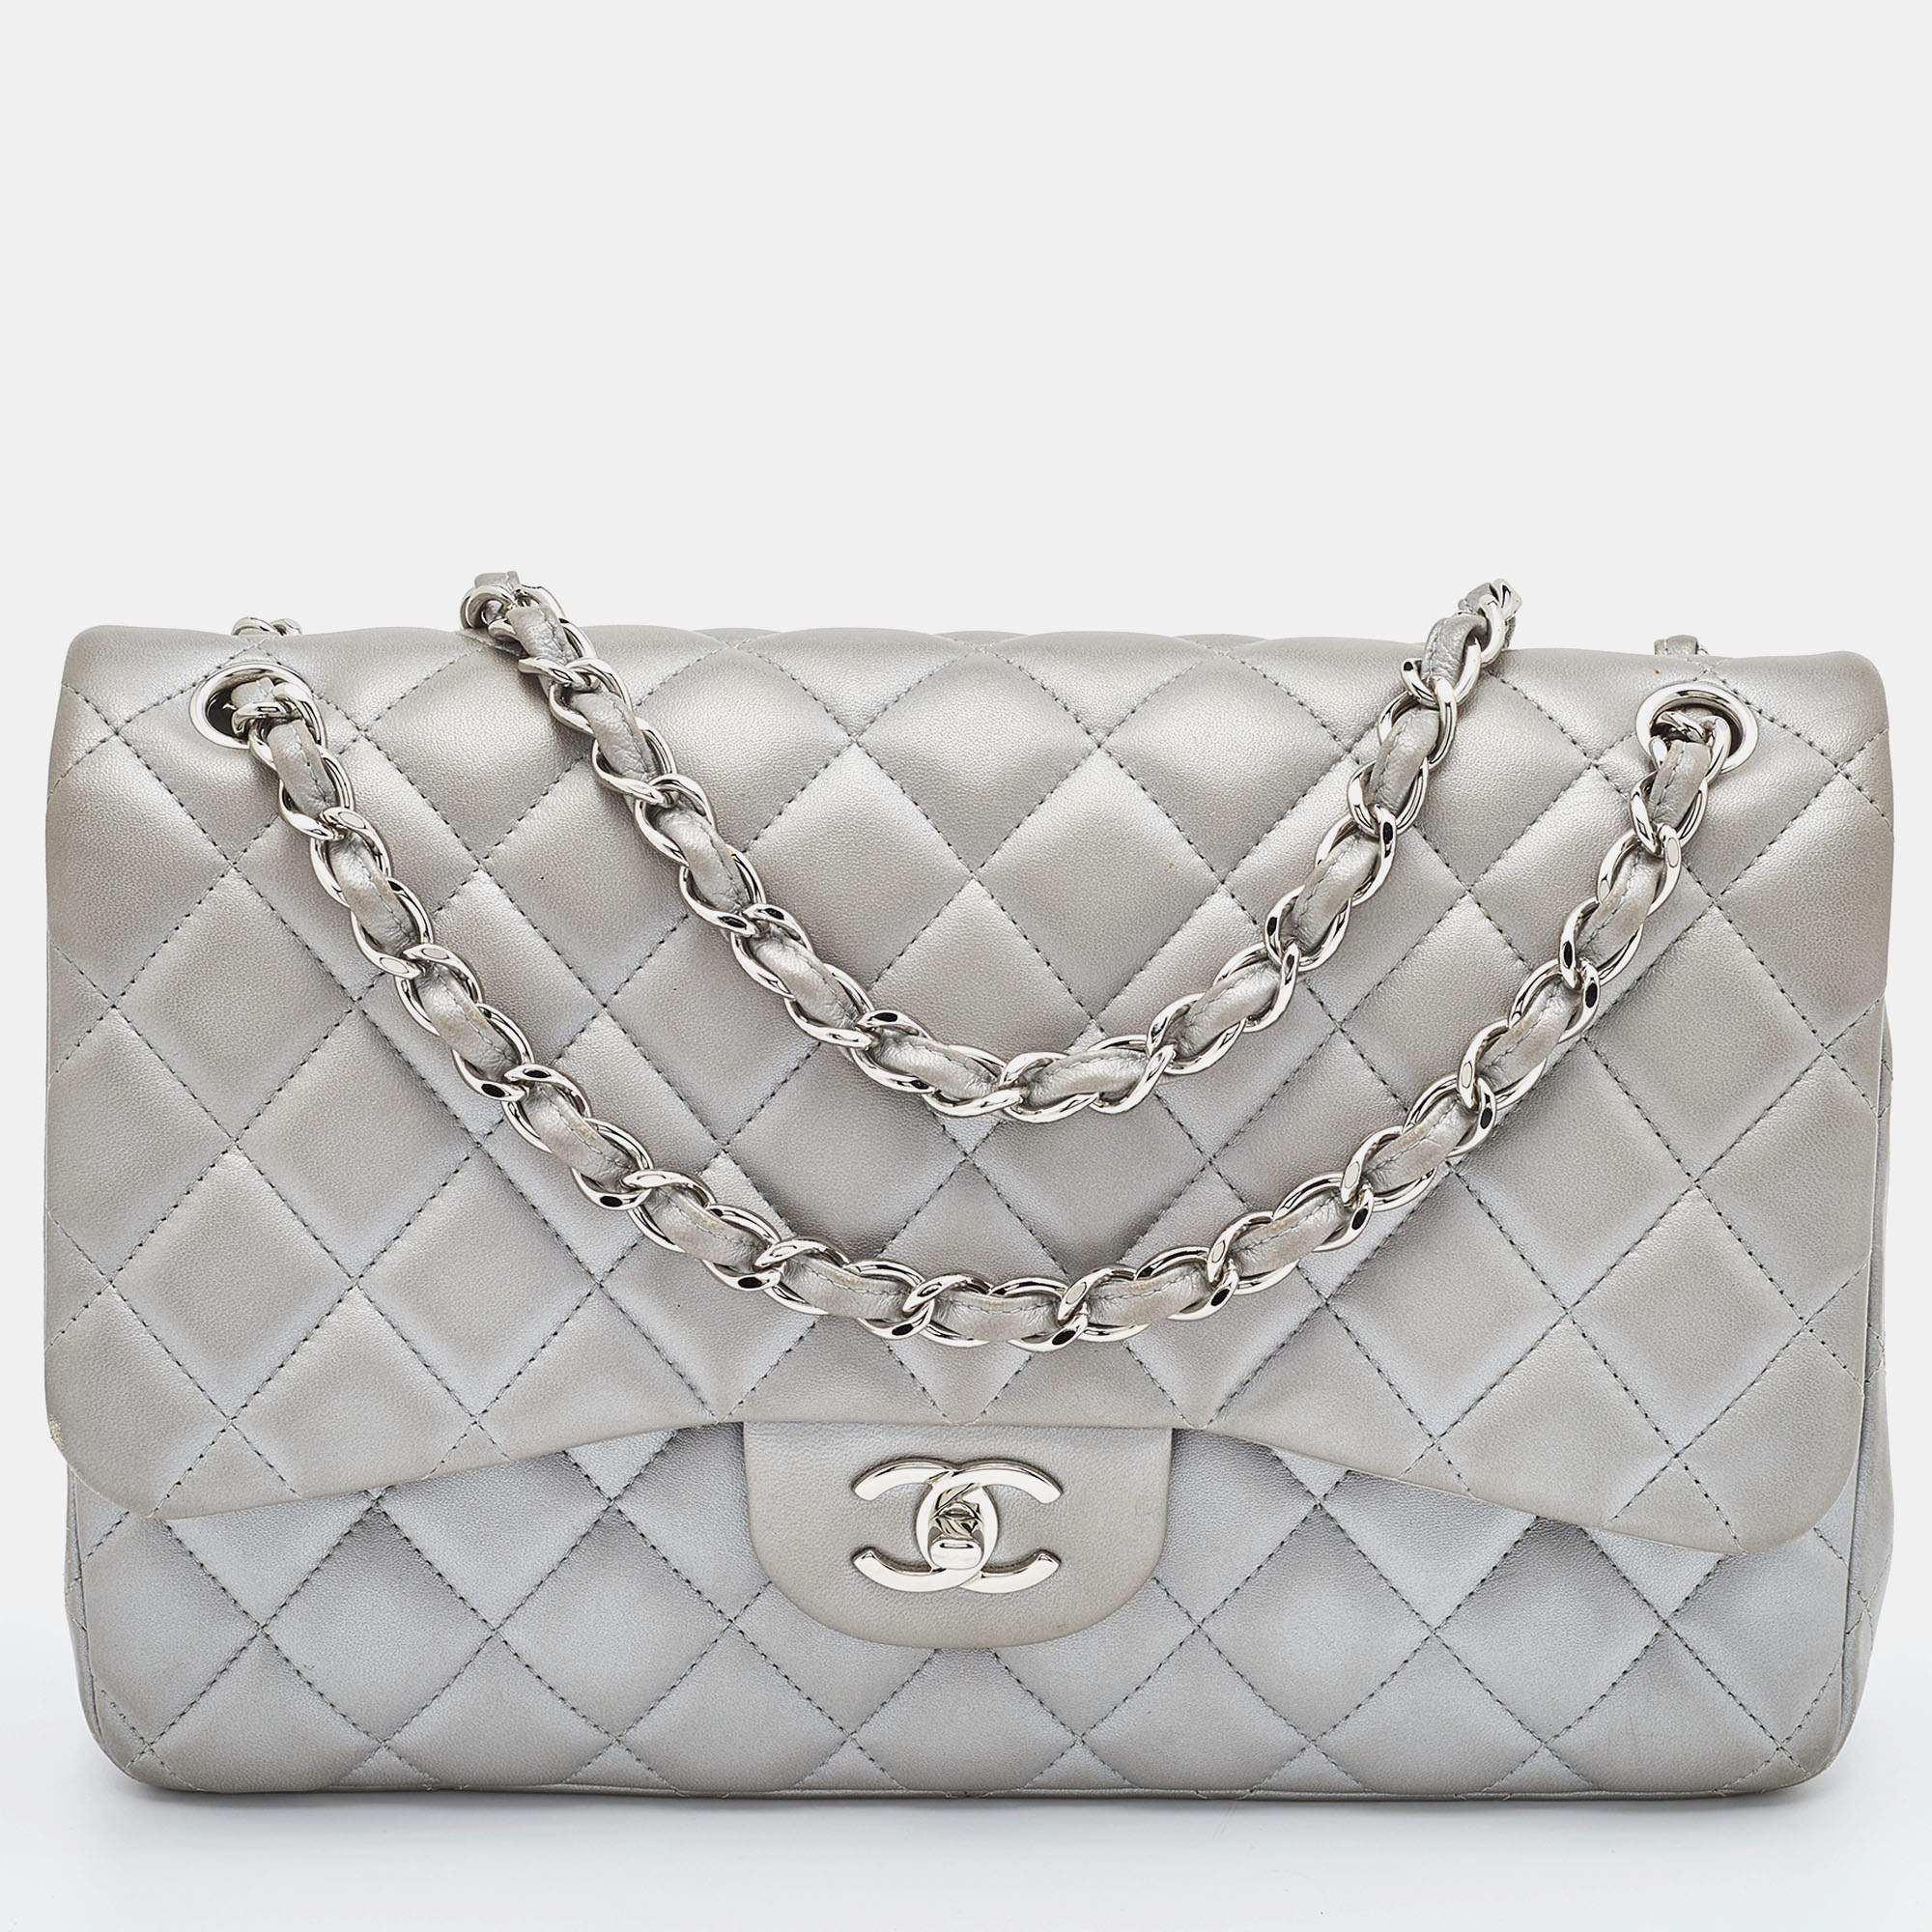 off white chanel bag new